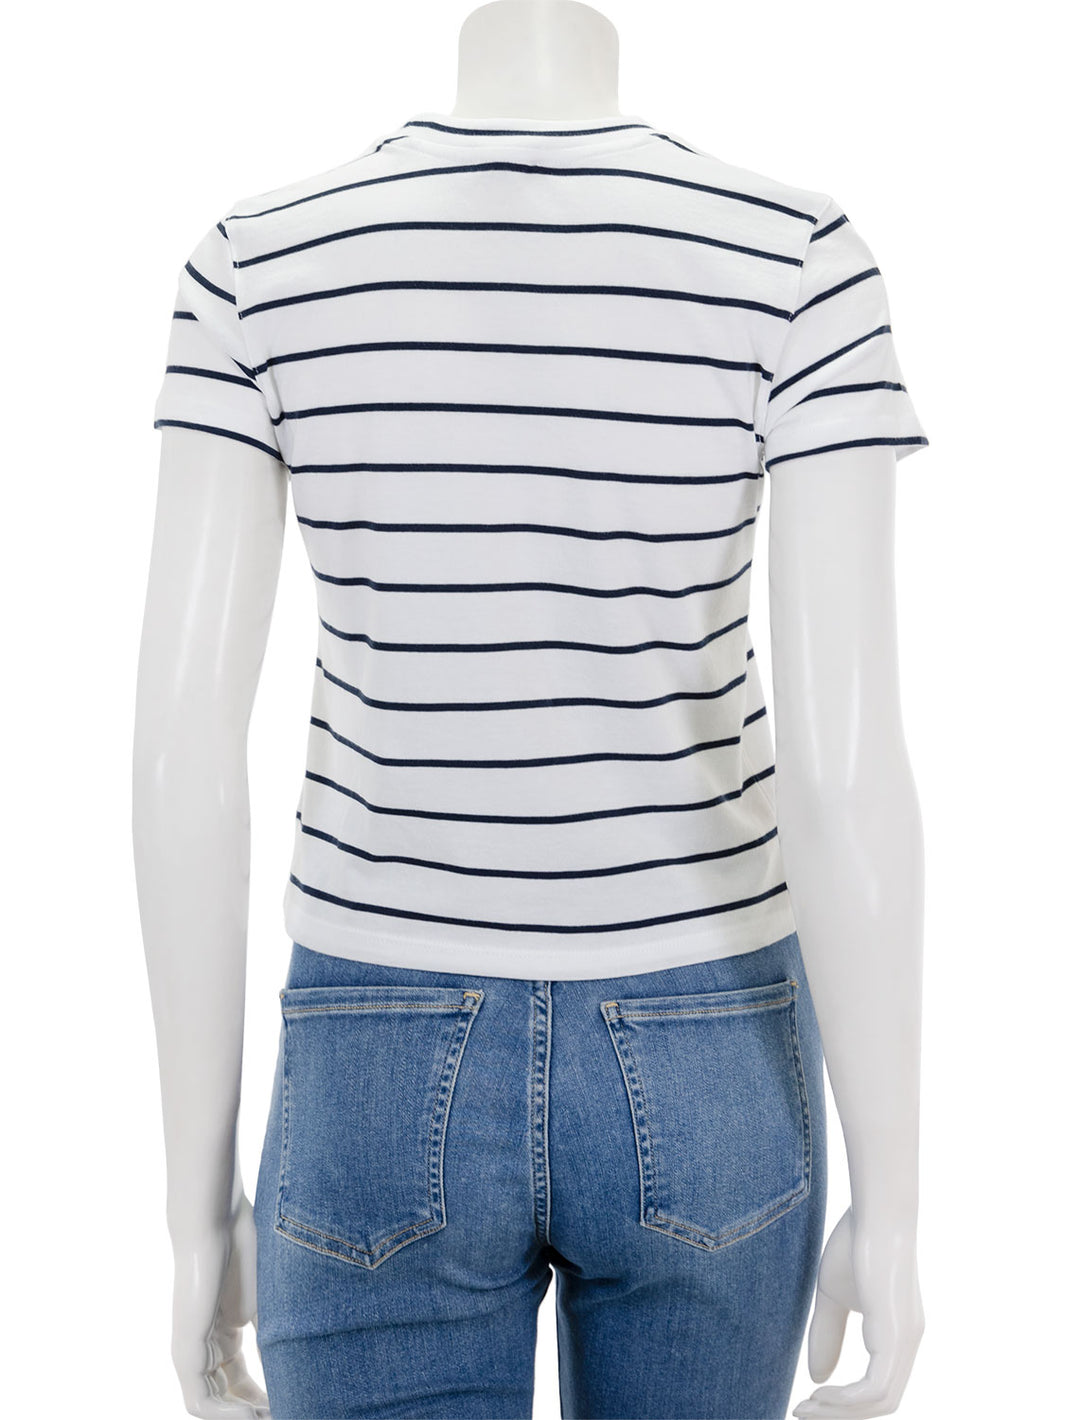 Back view of Patrick Assaraf's short sleeve organic cotton stripe high neck baby tee in white.